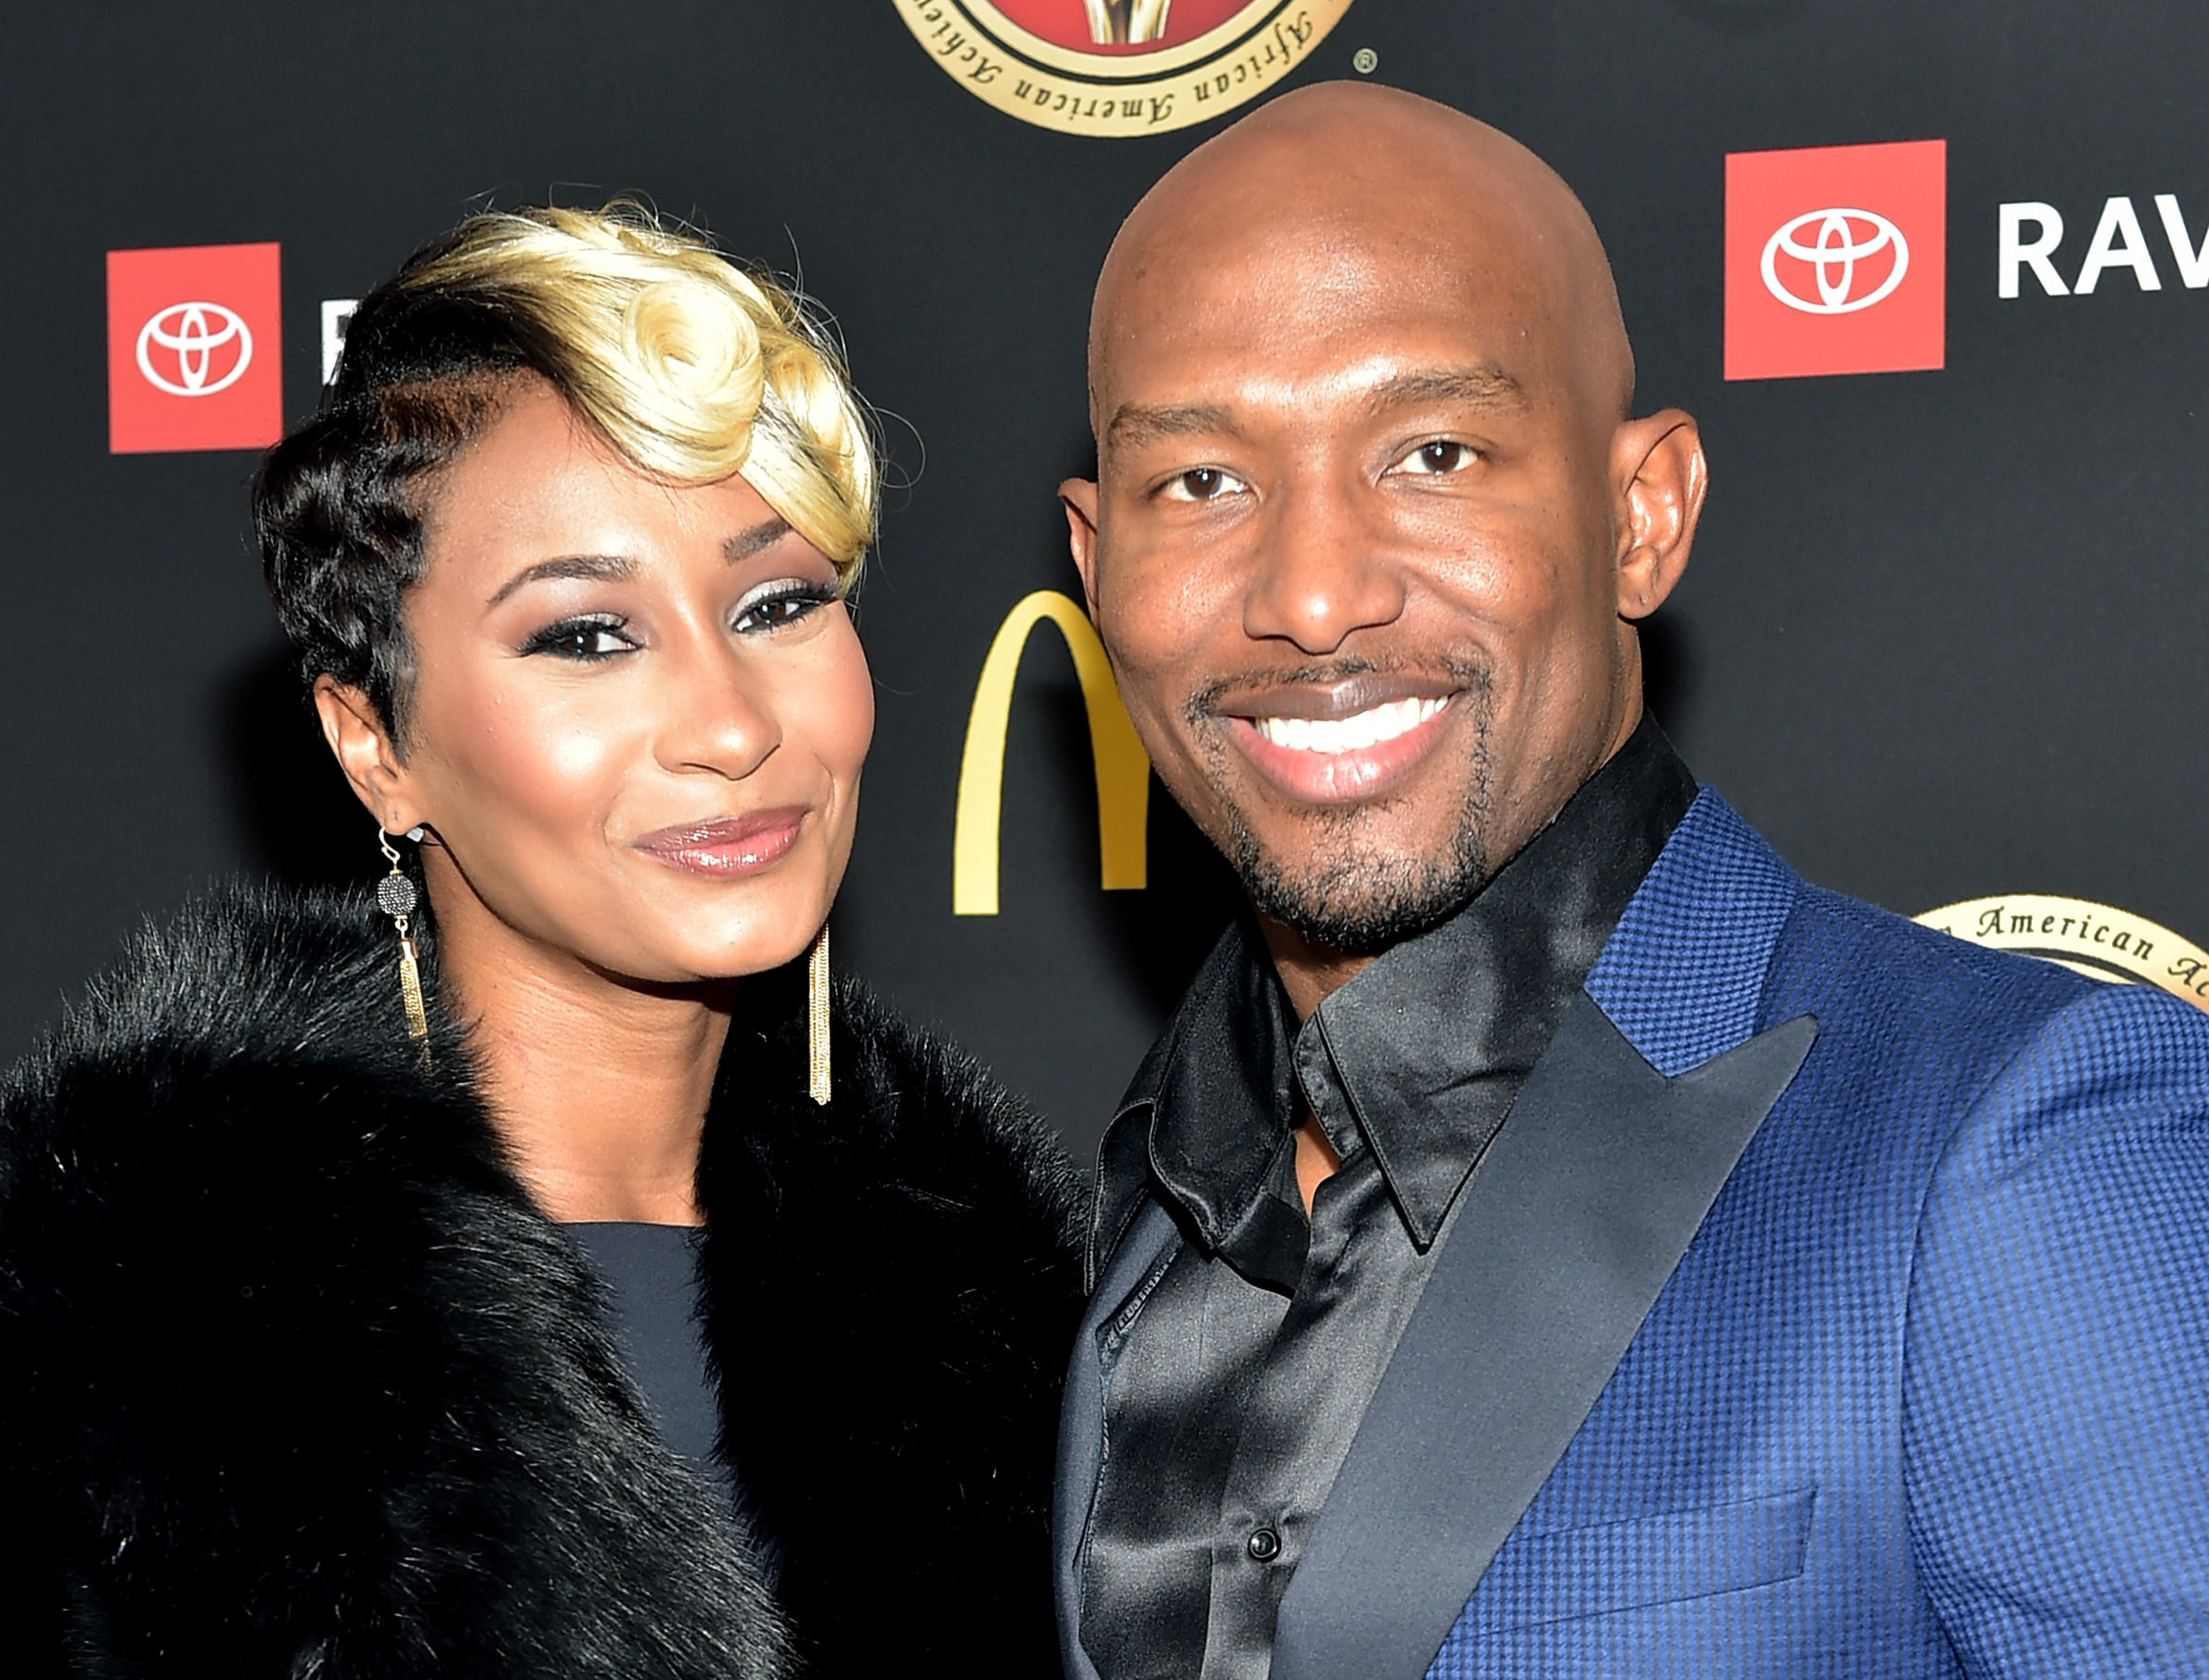 Martell and Melody Holt attend Trumpet Awards; Melody says Martell is suing her for custody of their four children